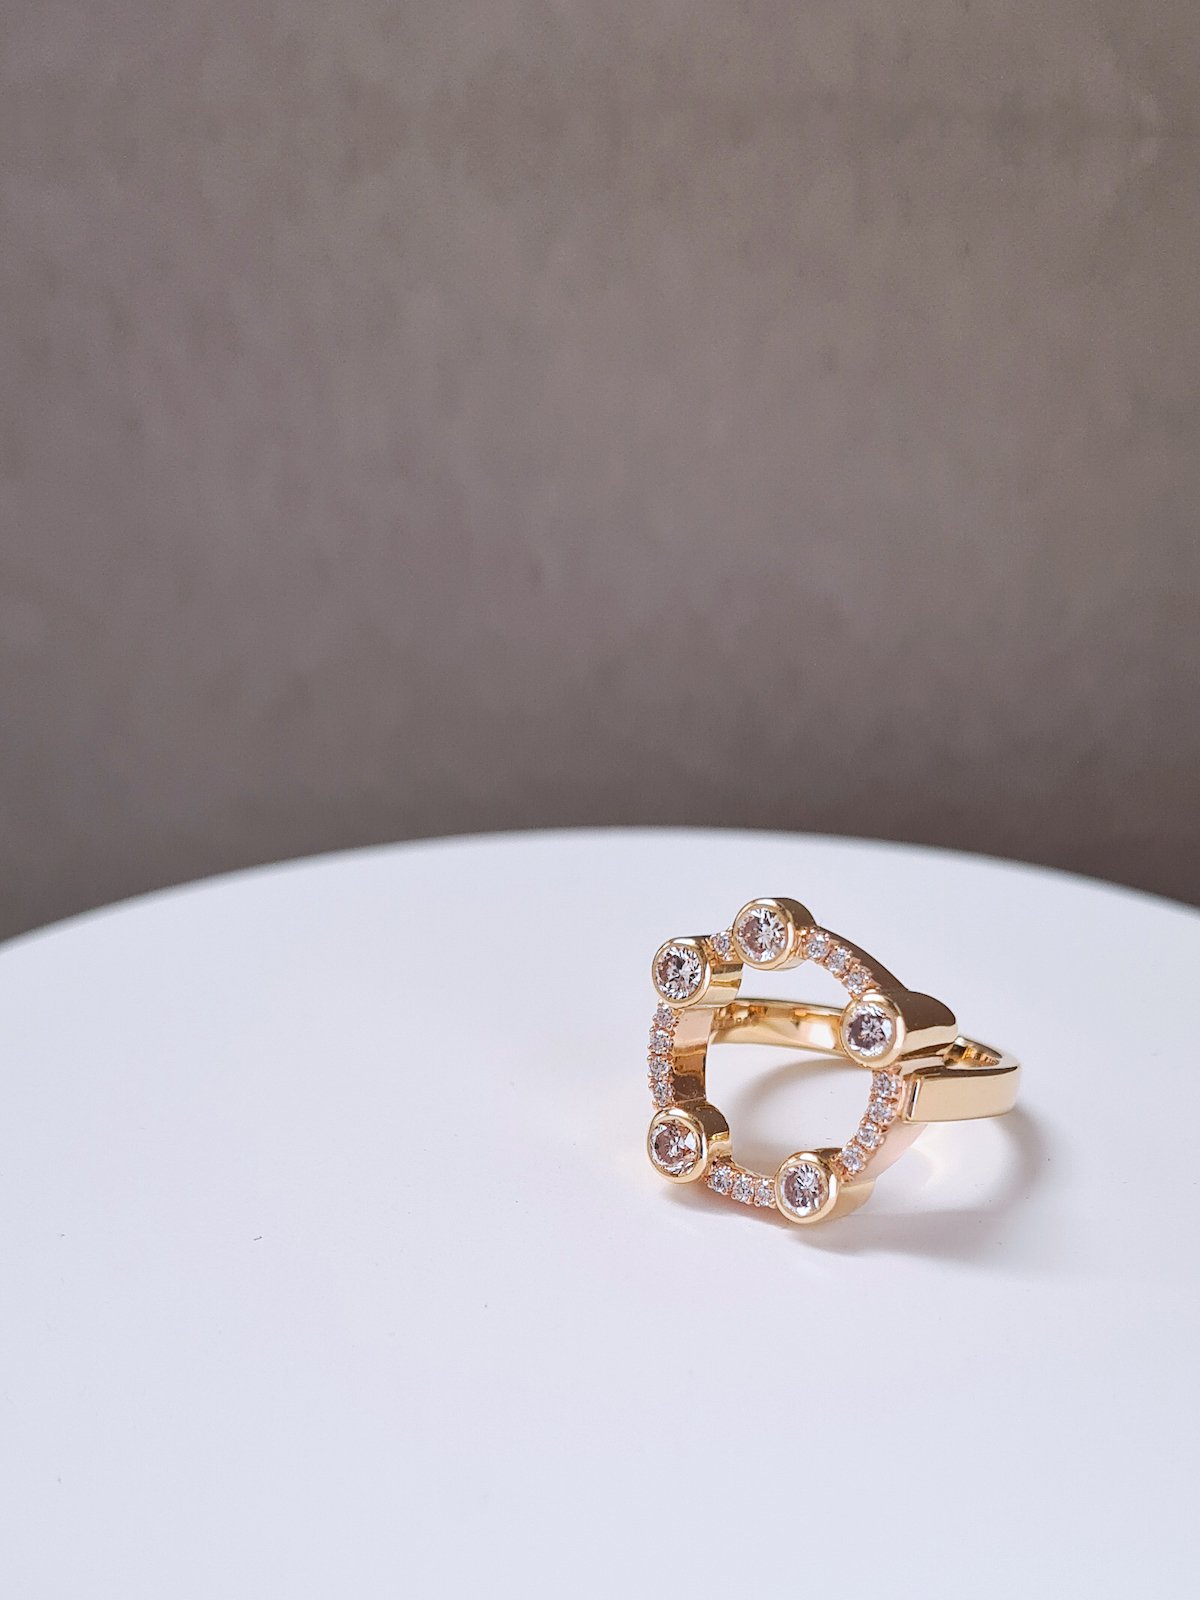 9a_ Diamond and gold ring remodelled from father's wedding band © Amanda Li Hope.jpg